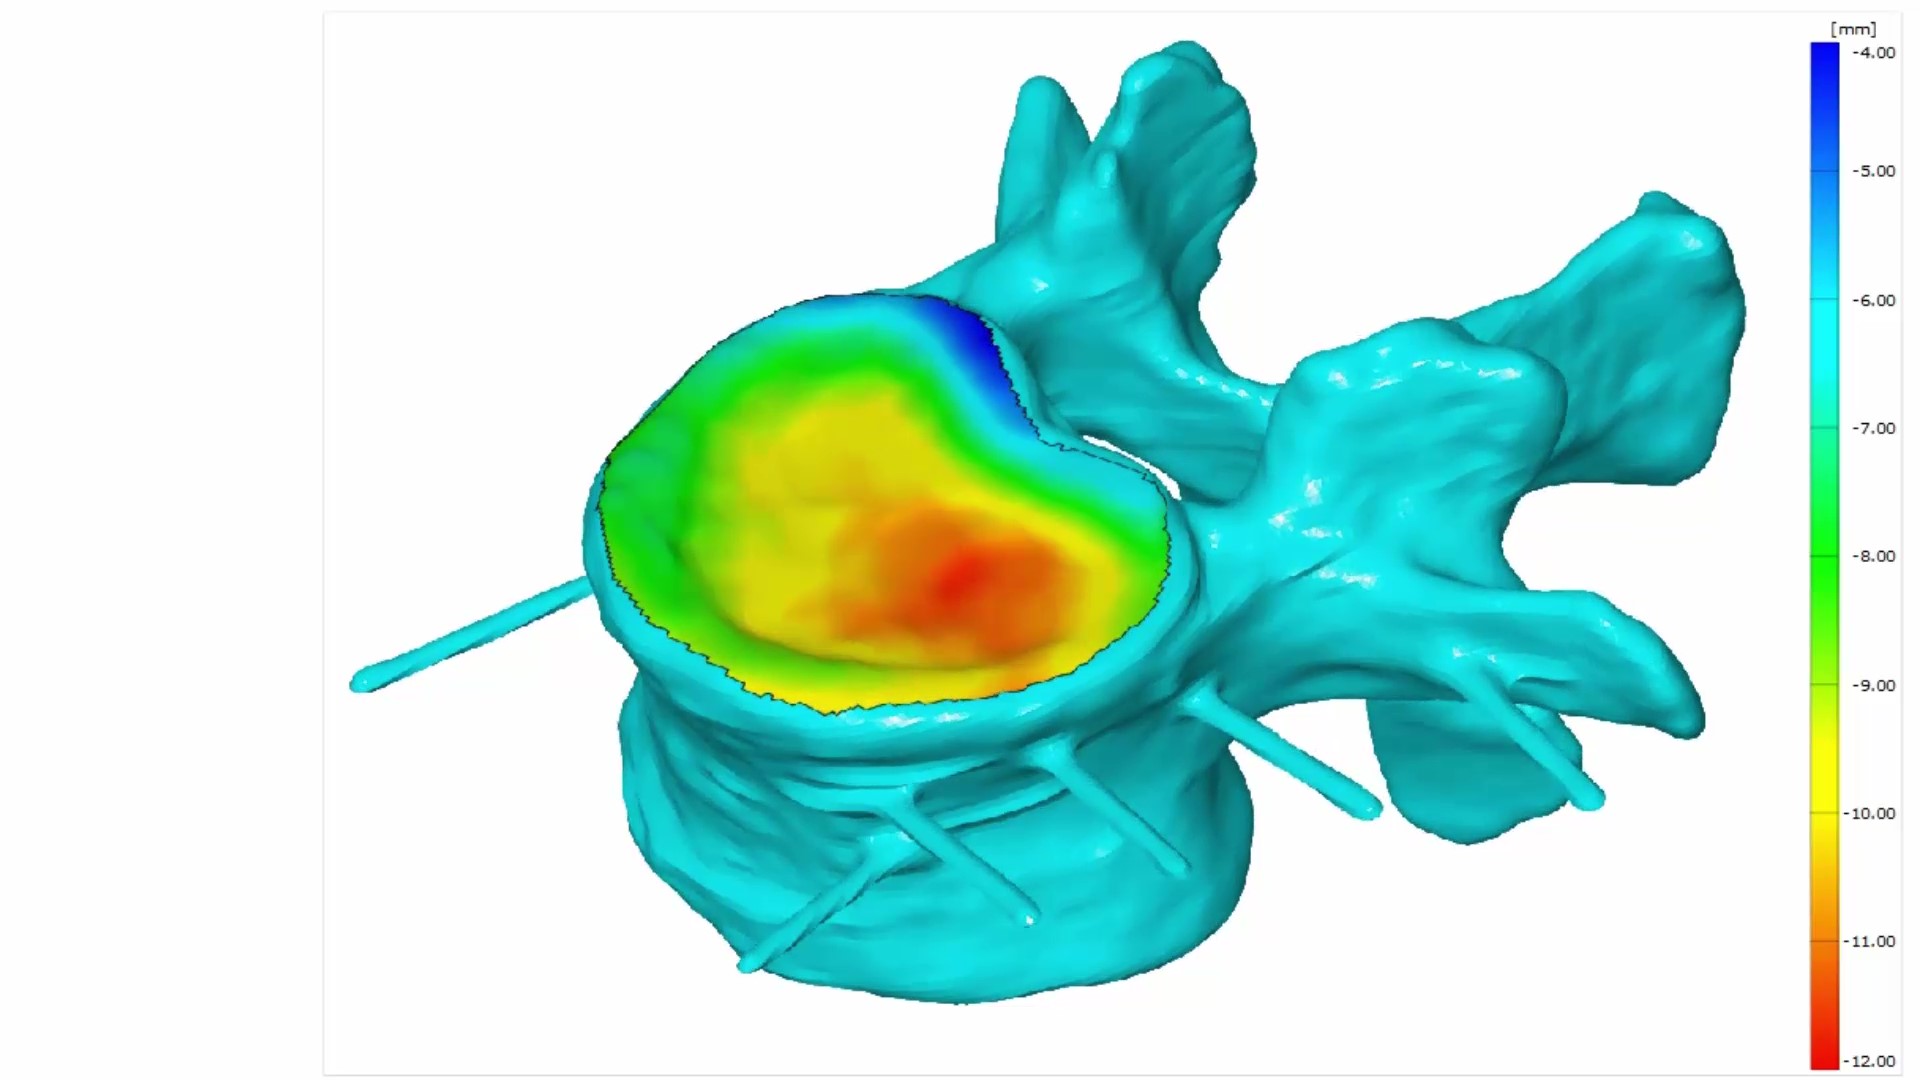 Displacement of a Spine Disc during a compression test